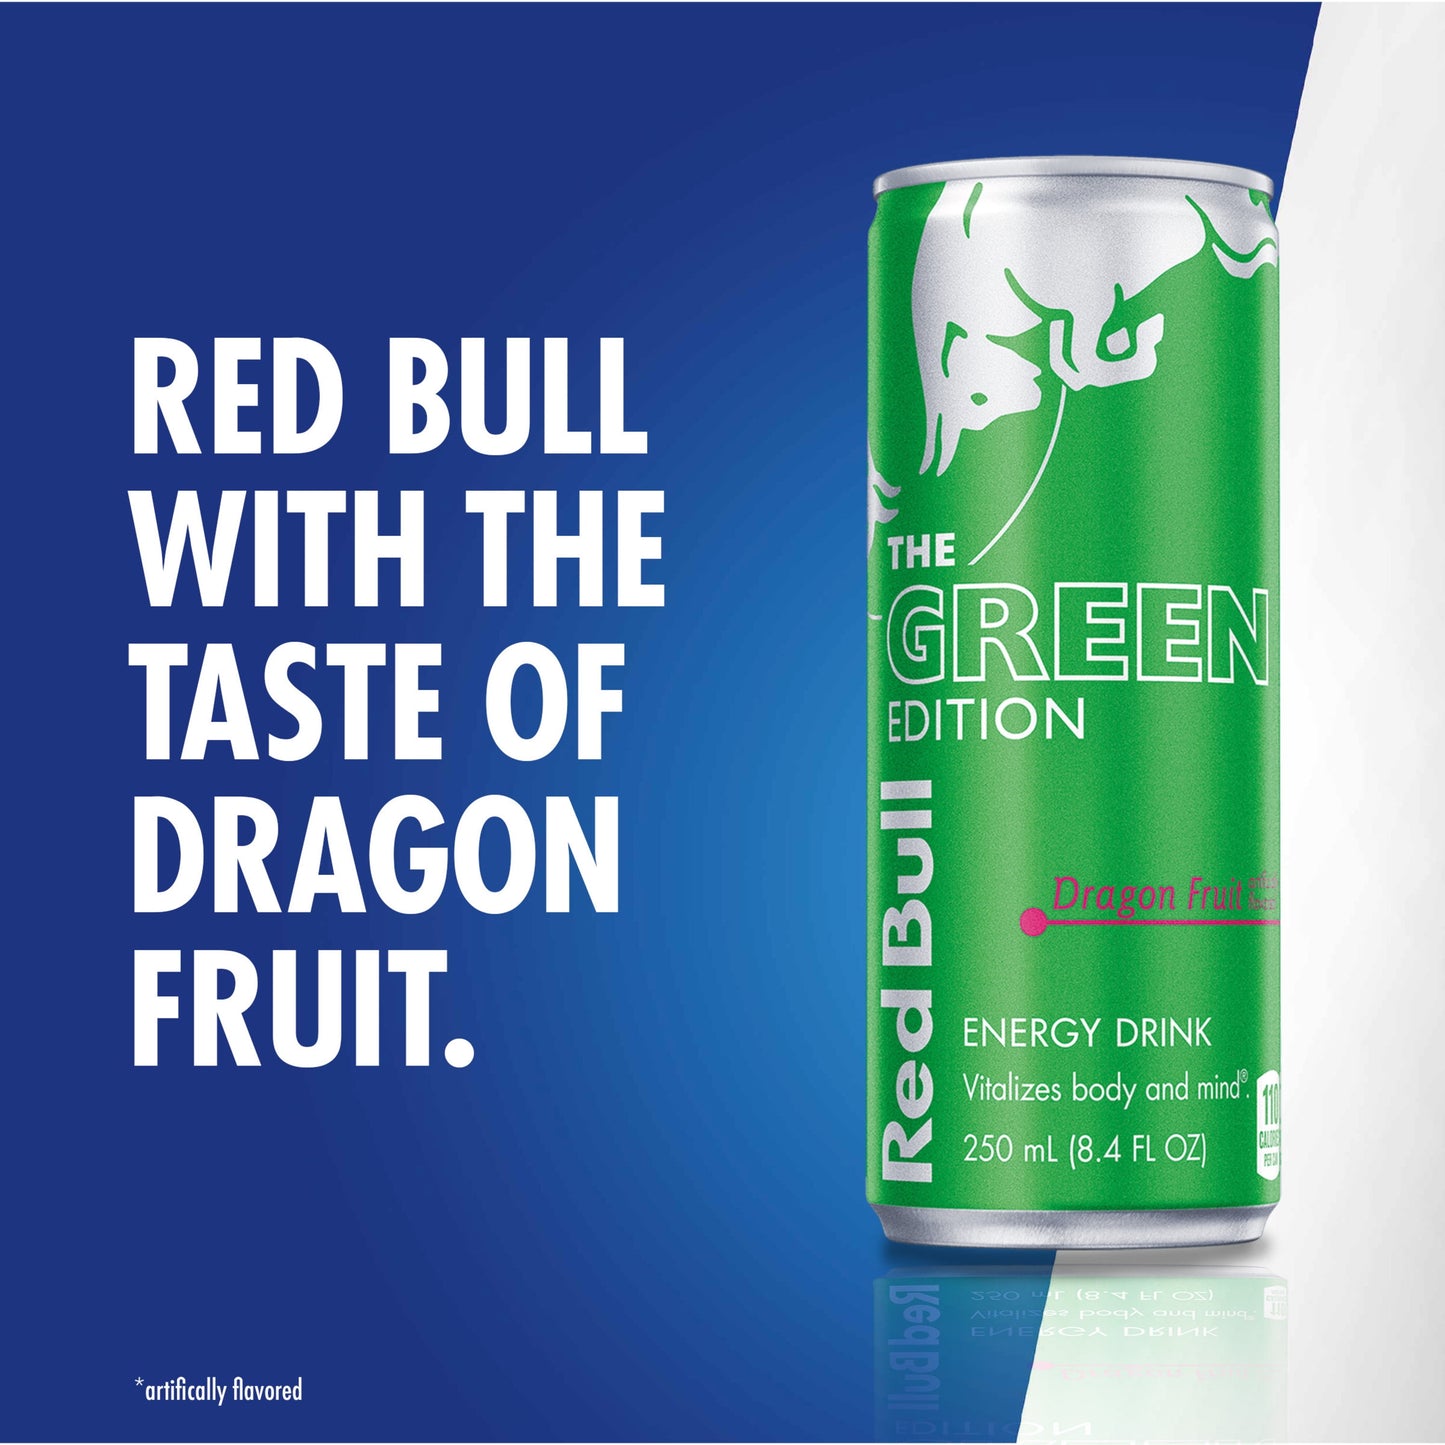 Red Bull Green Edition Dragon Fruit Energy Drink, 8.4 fl oz, Pack of 4 Cans